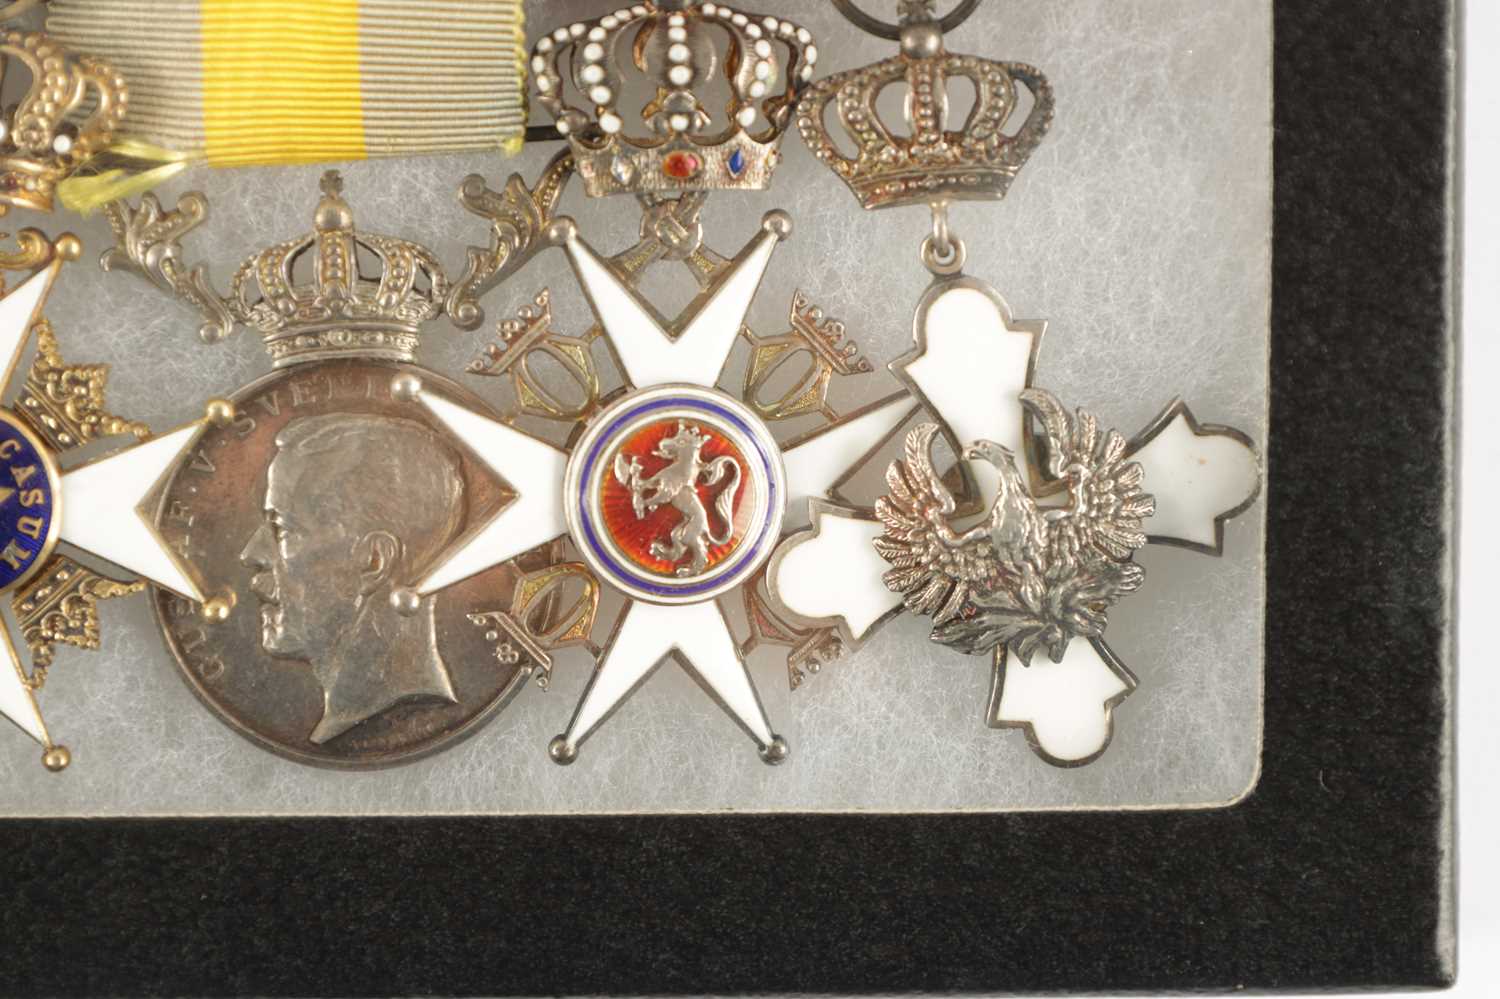 A GROUP OF FOUR COMMANDER’S MEDALS - Image 3 of 3